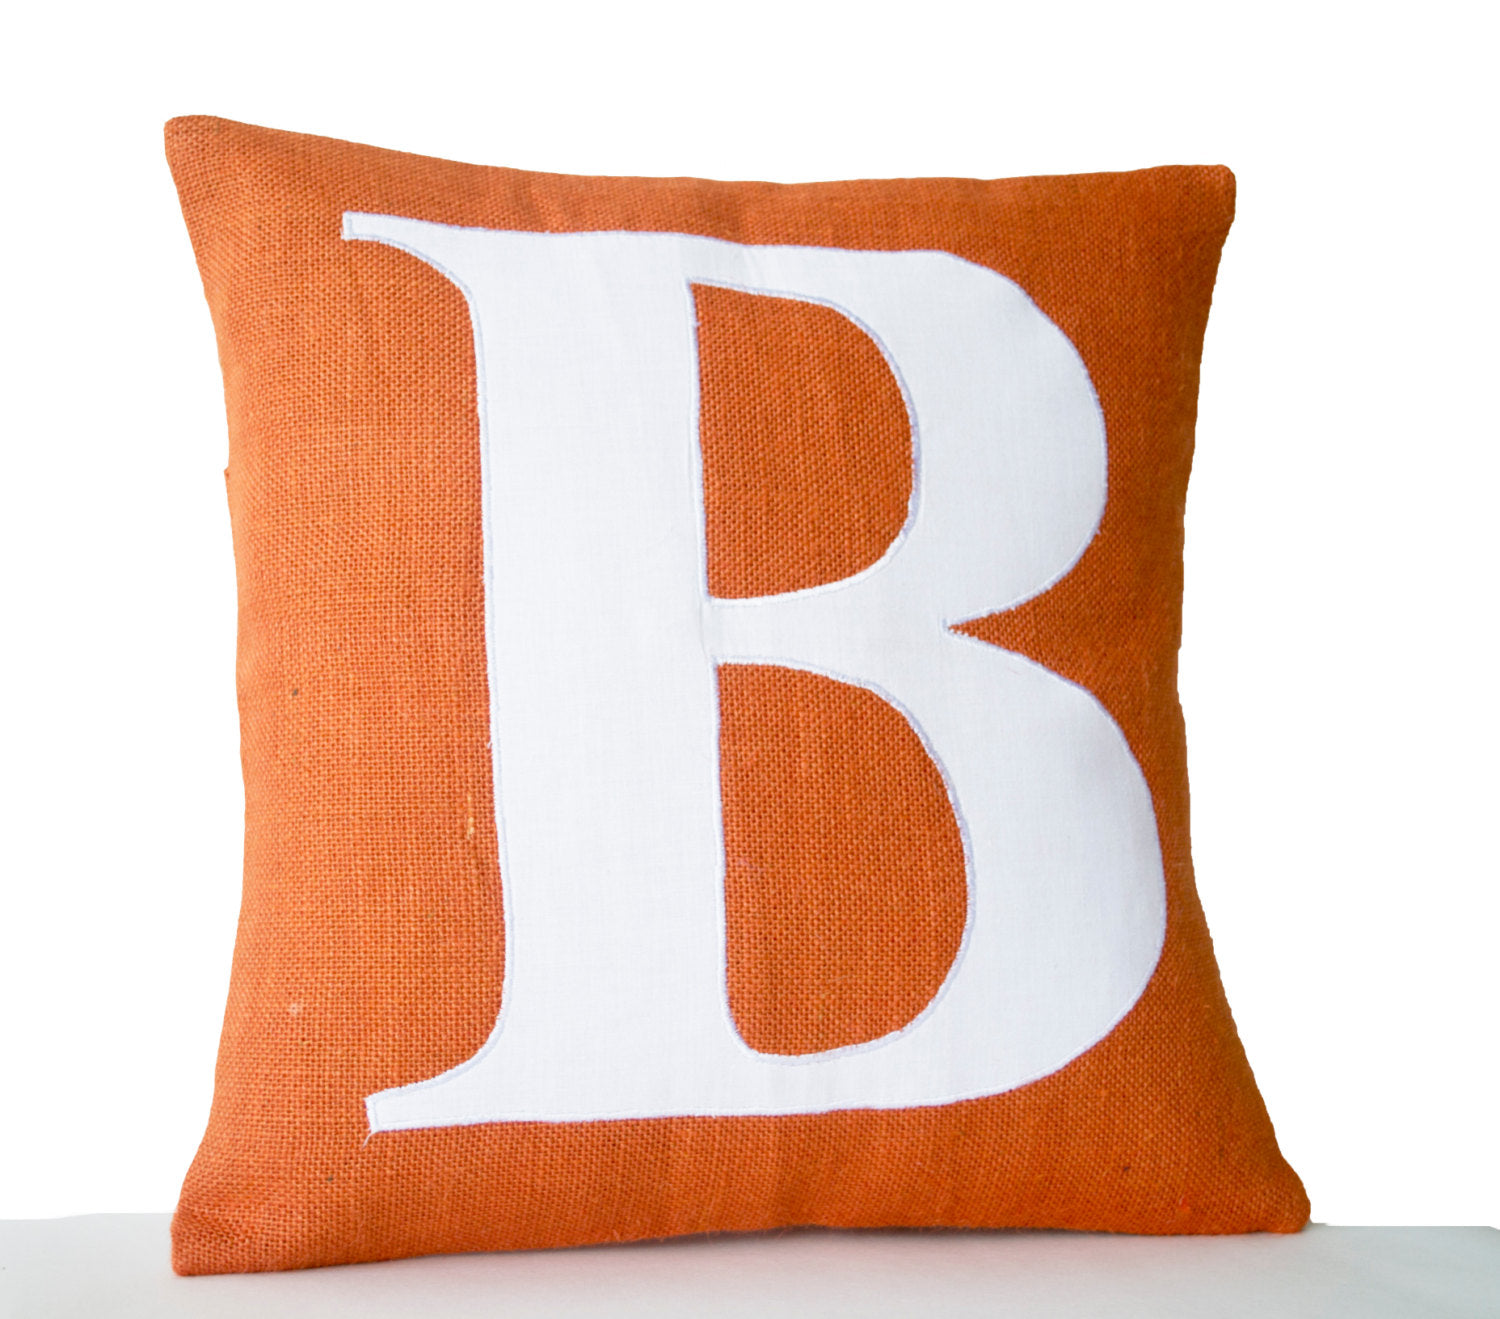 Amore Beaute monogrammed throw pillow is backed by a cotton lining to give the fabric a nice drape.